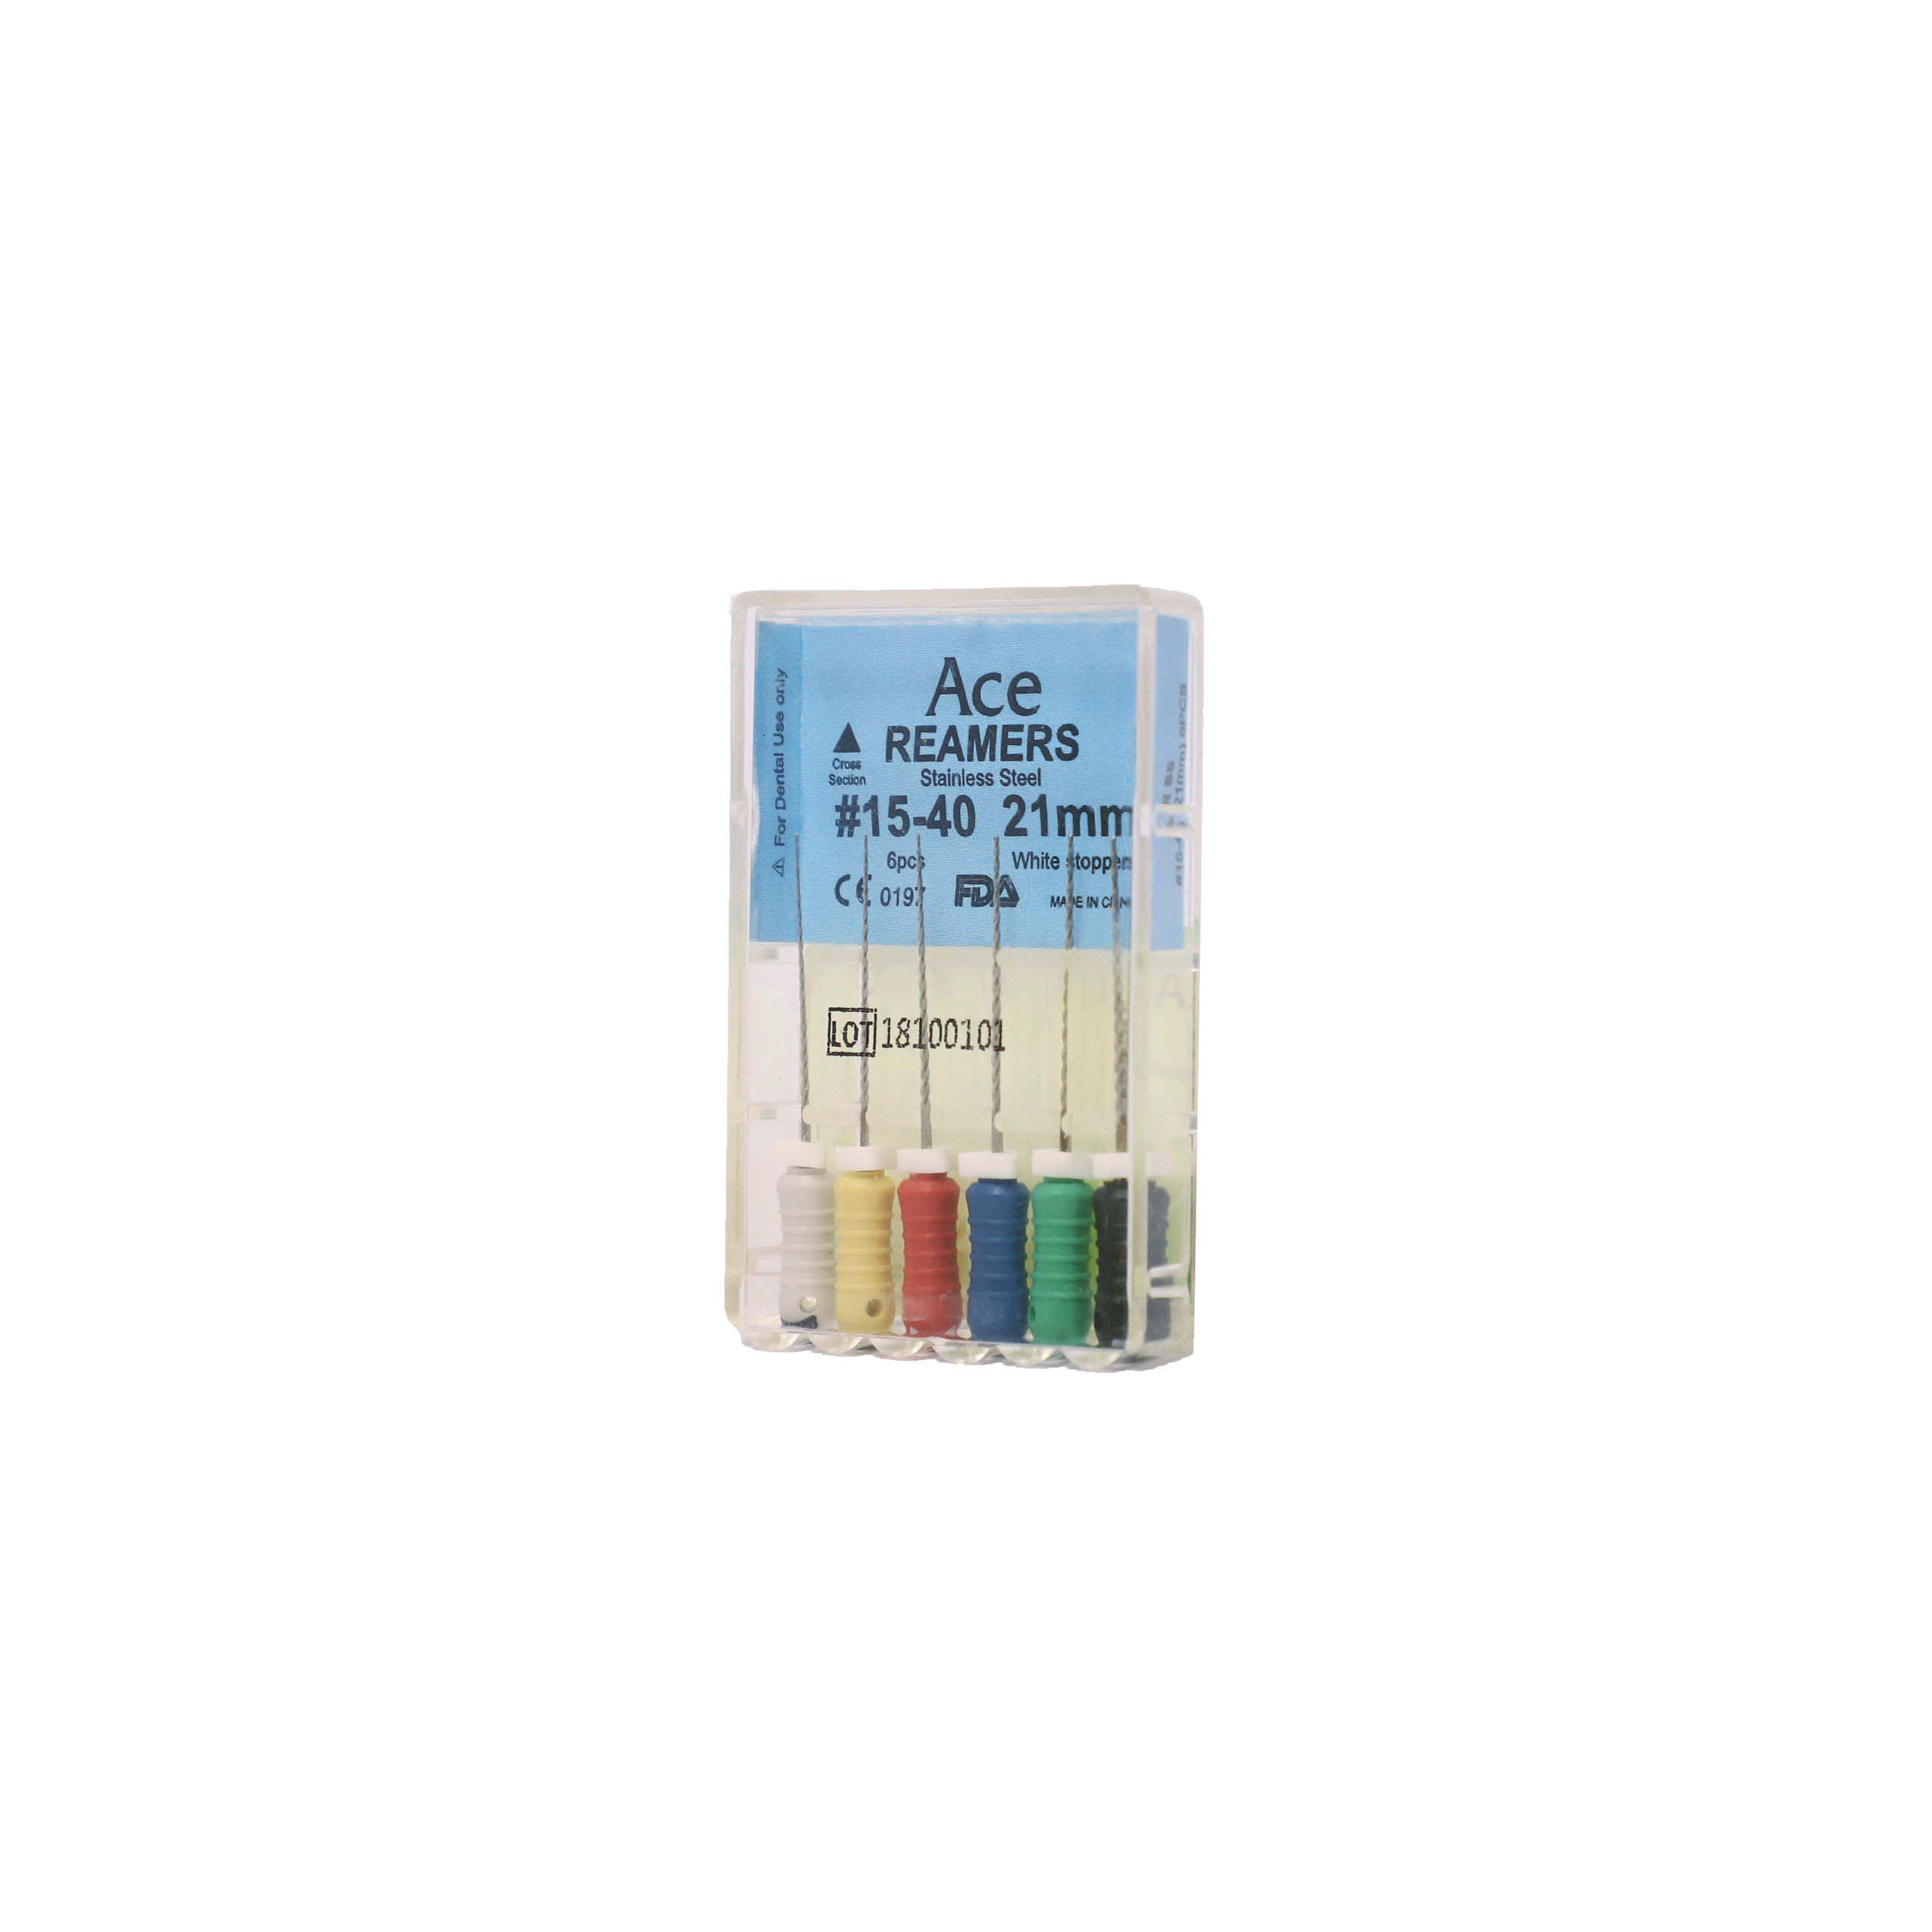 Ace Reamers #15-40, 21mm  (Pack of 5)